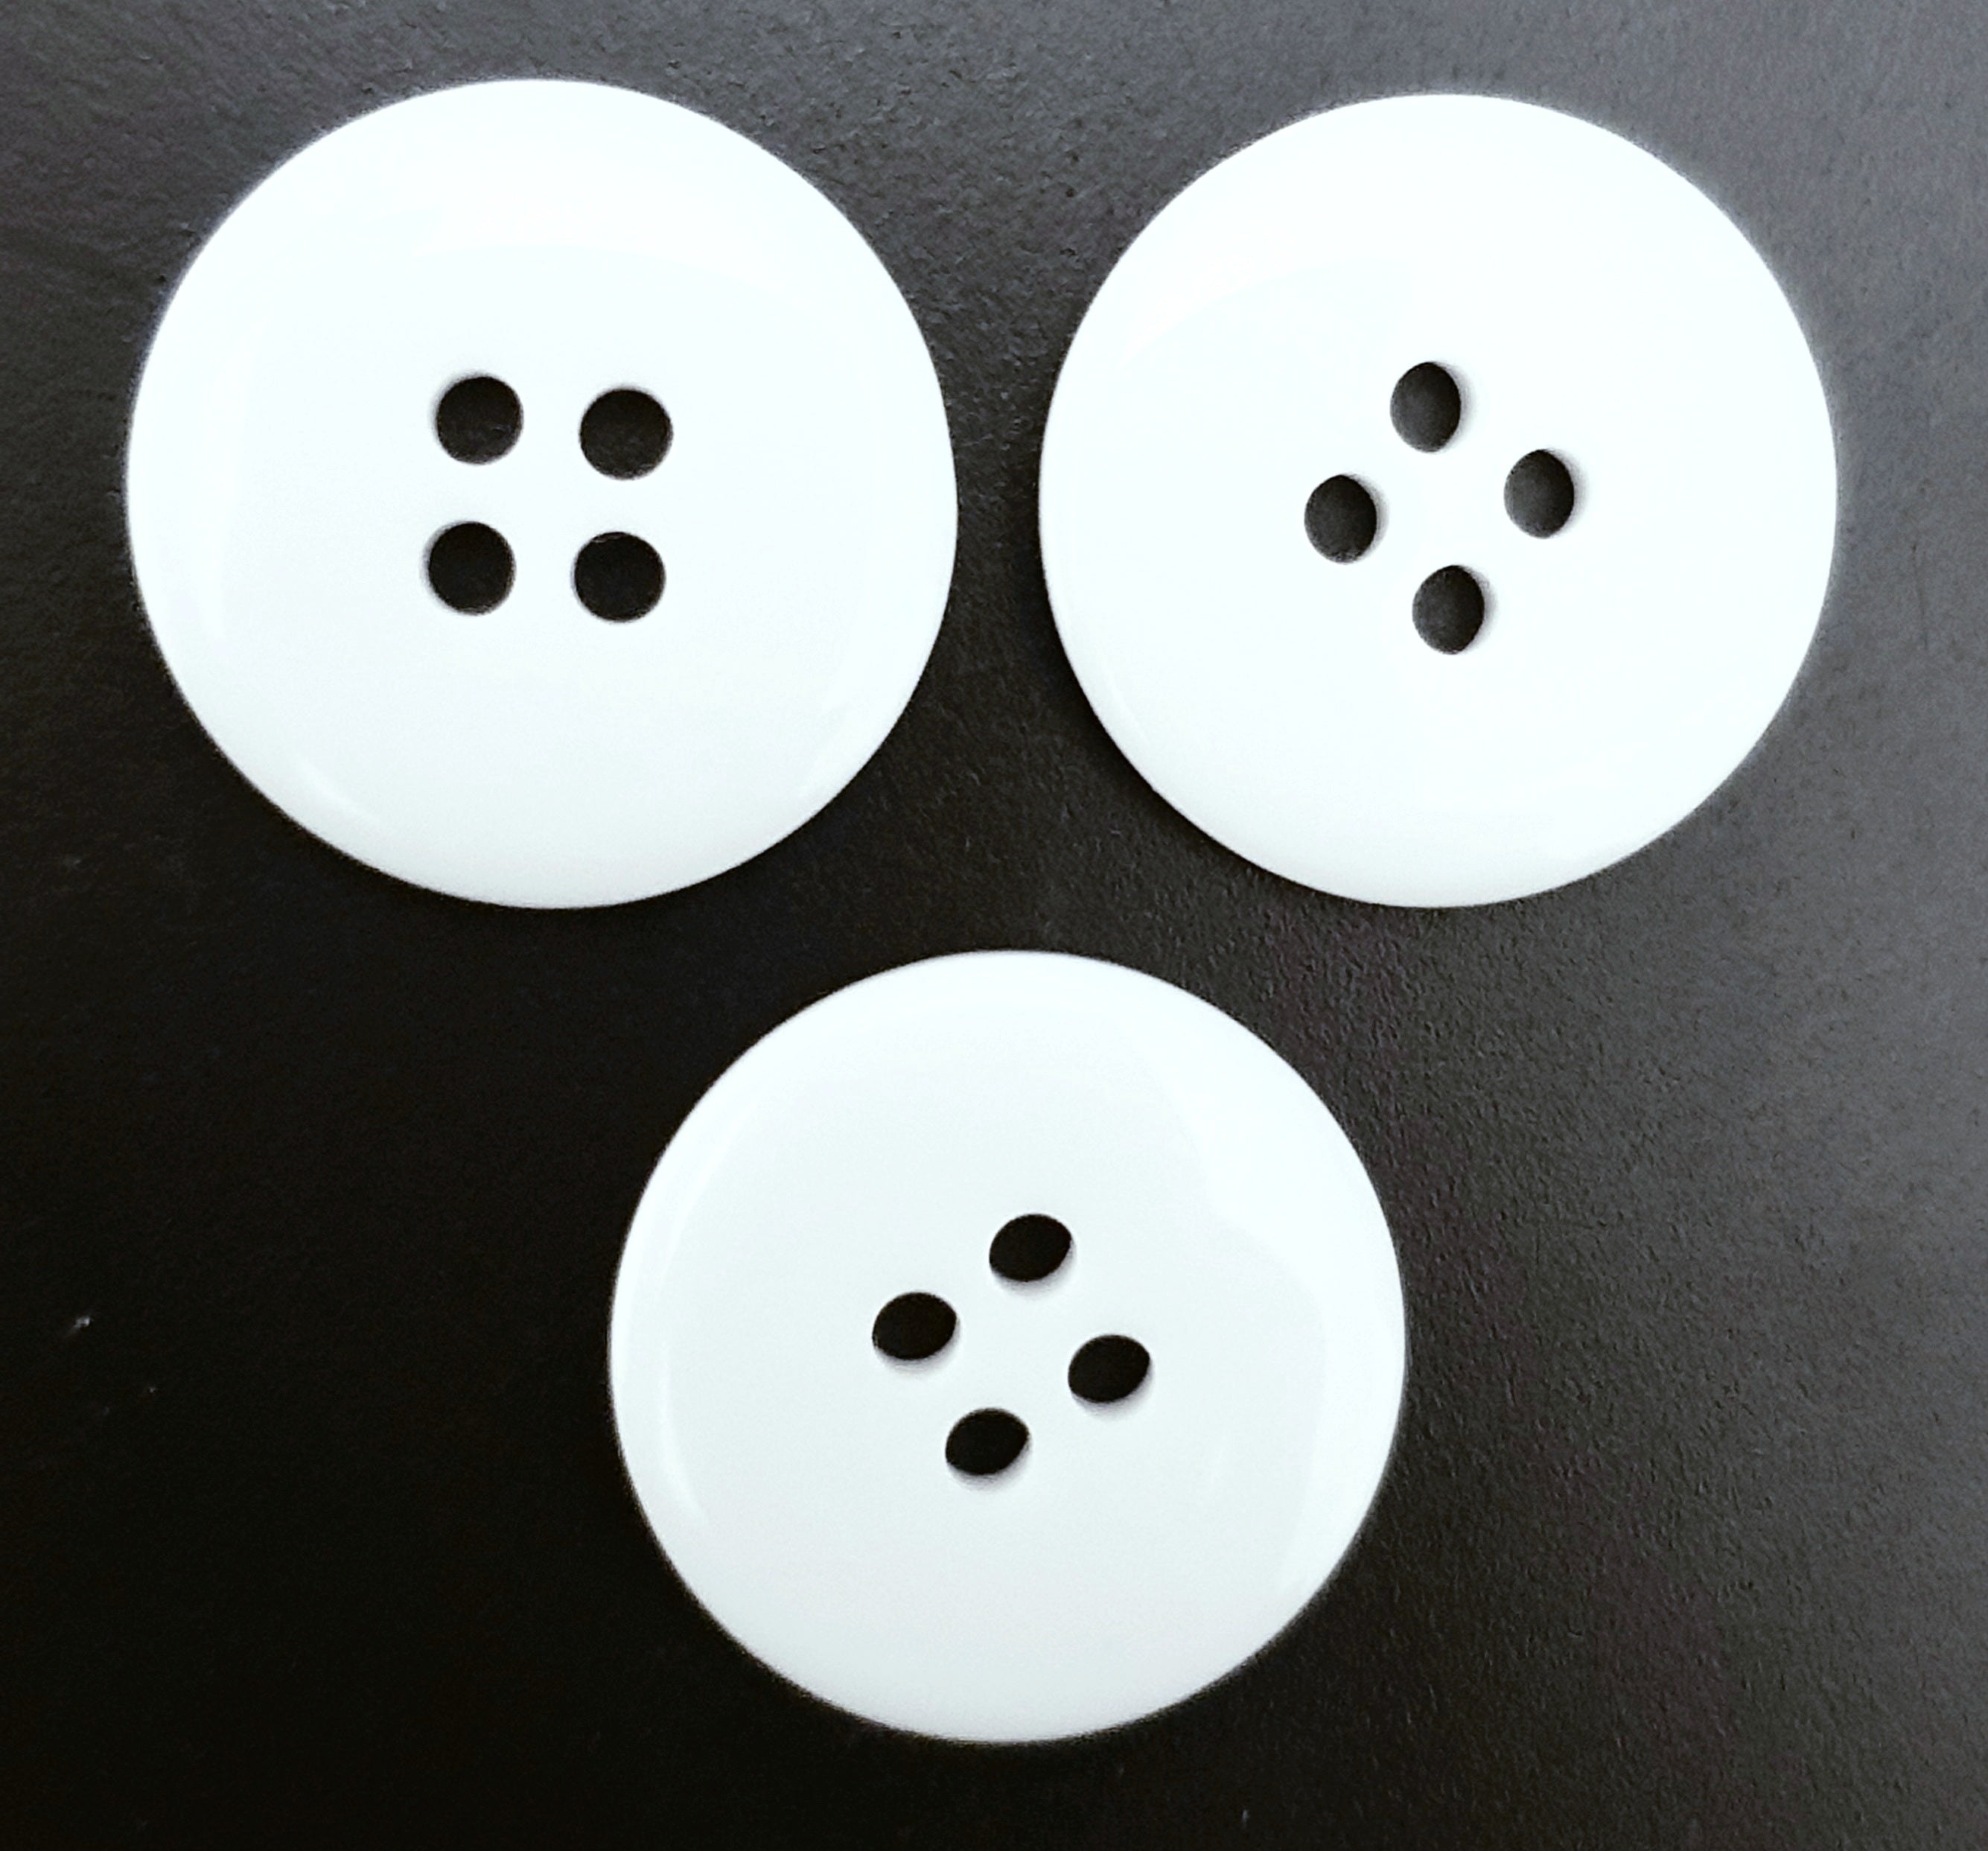 MajorCrafts 30pcs 20mm Whiter 4 Holes Round Resin Sewing Buttons - Flat Edge